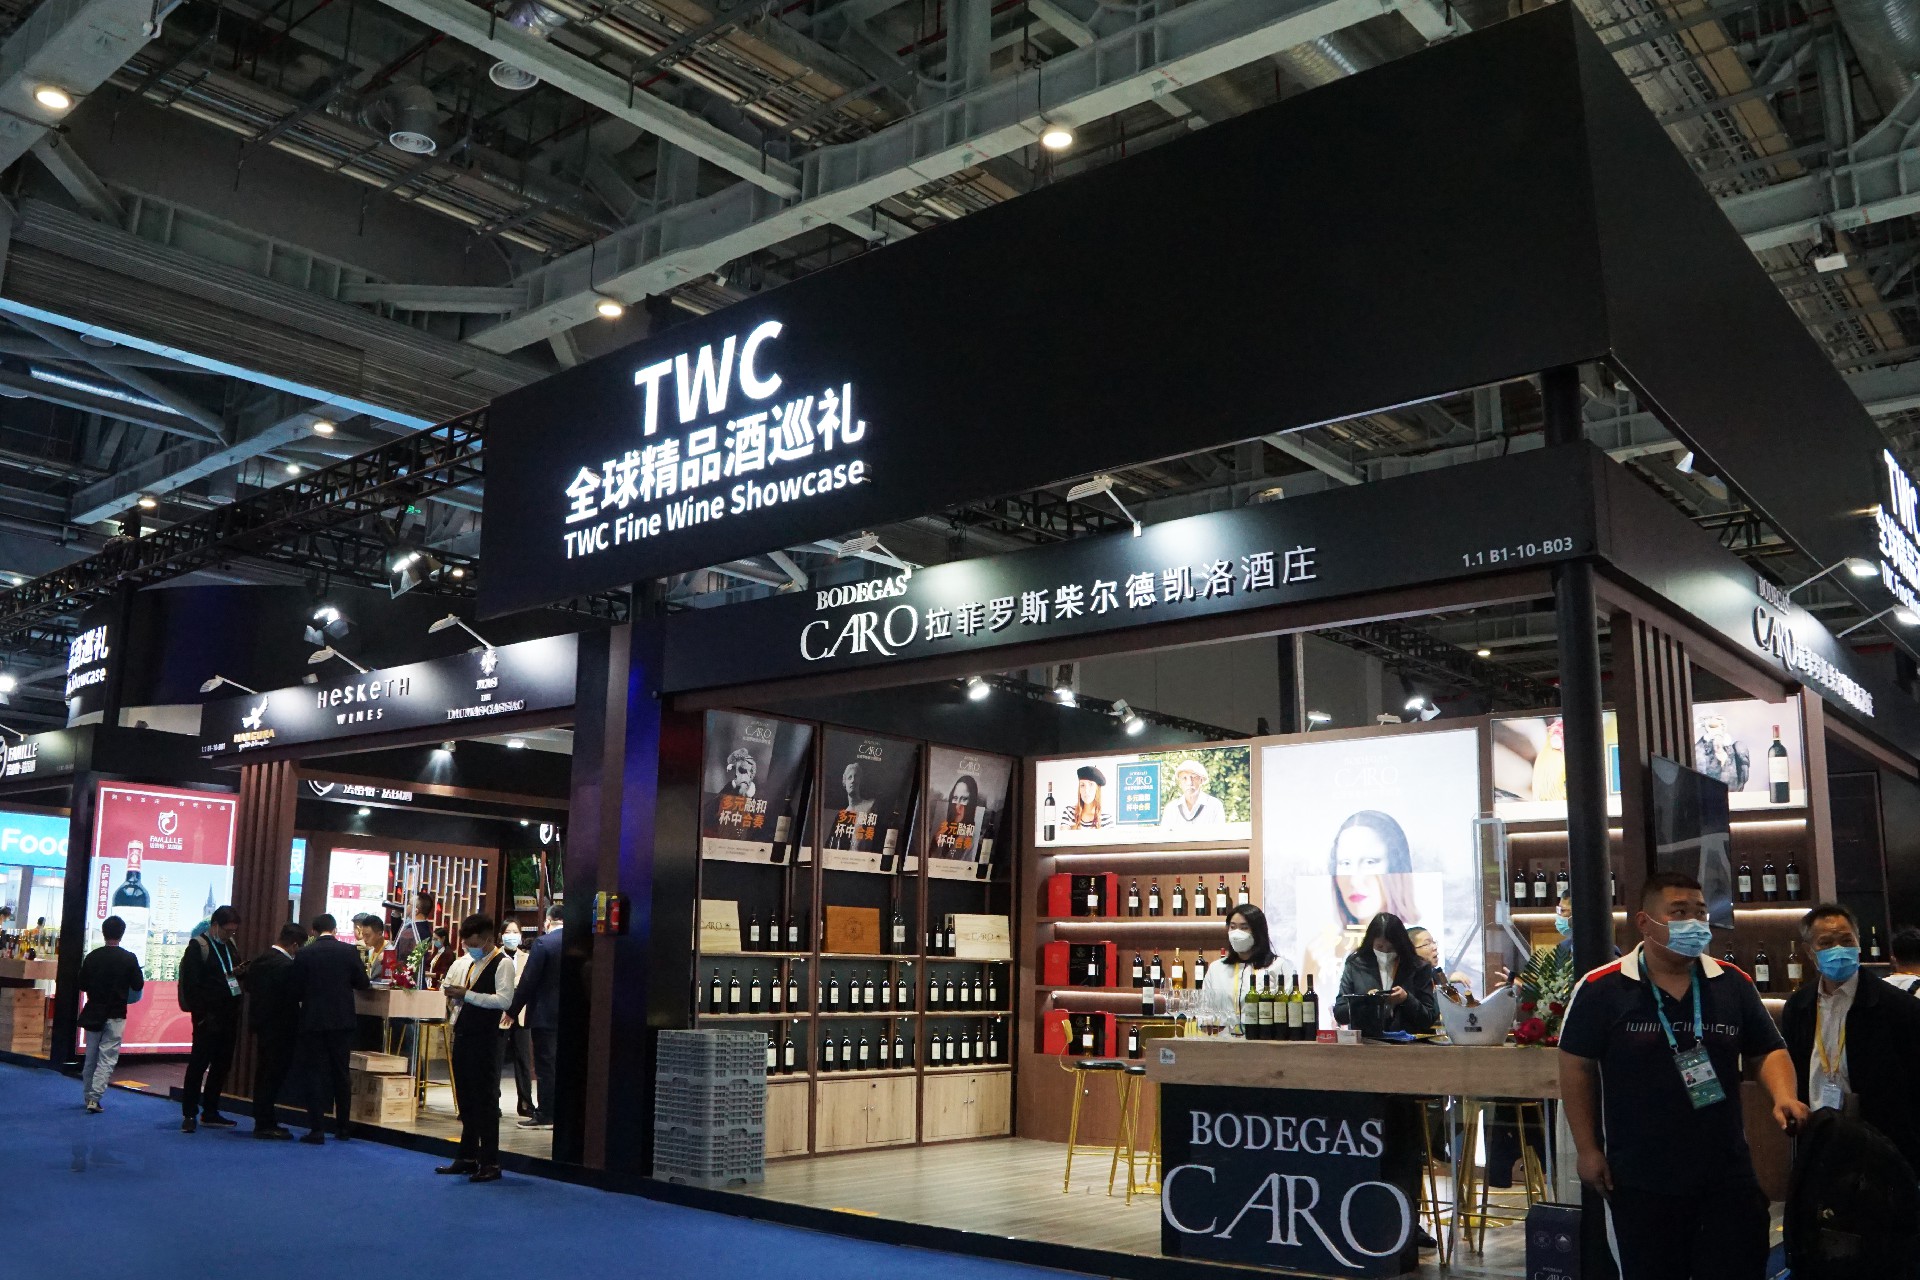 TopWine-The 3rd CIIE Booth Design Case